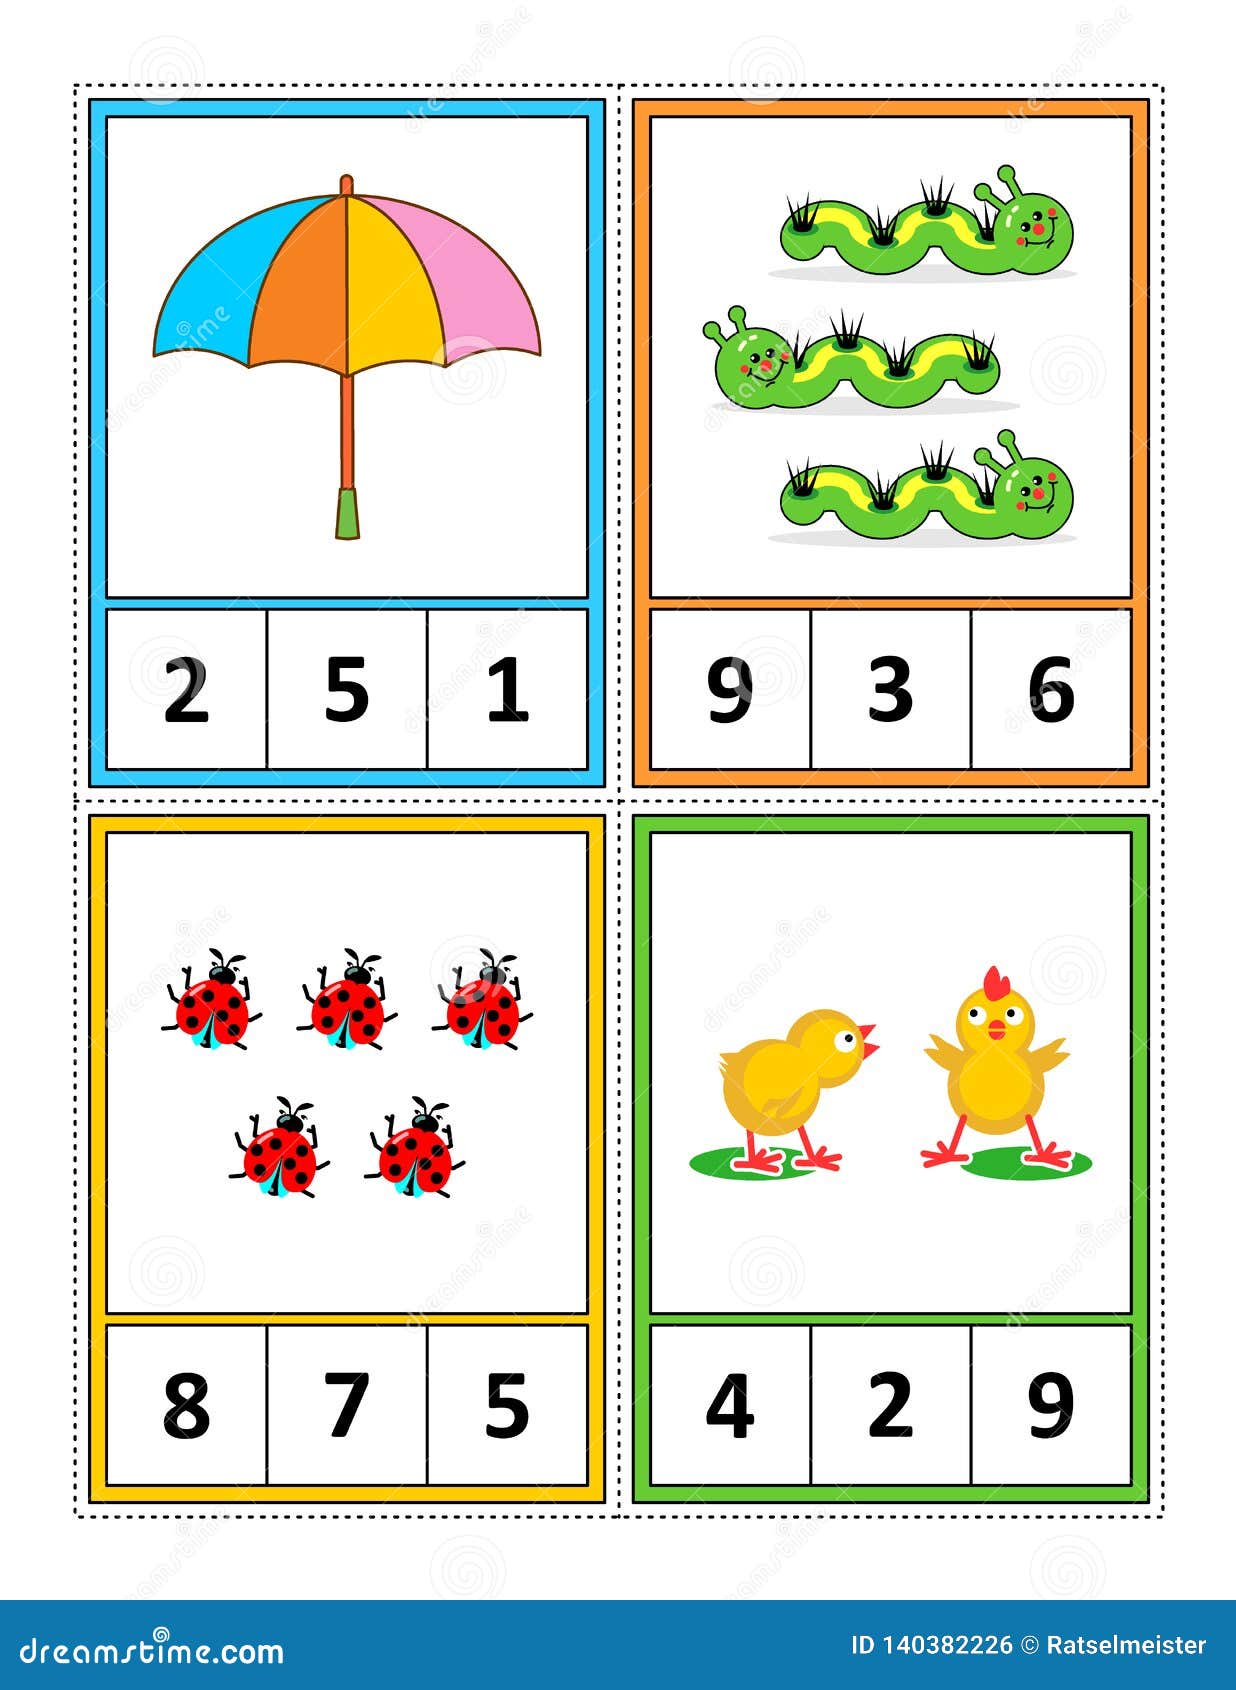 Math Activity Page For Kids - Learn And Practice Counting - Circle The